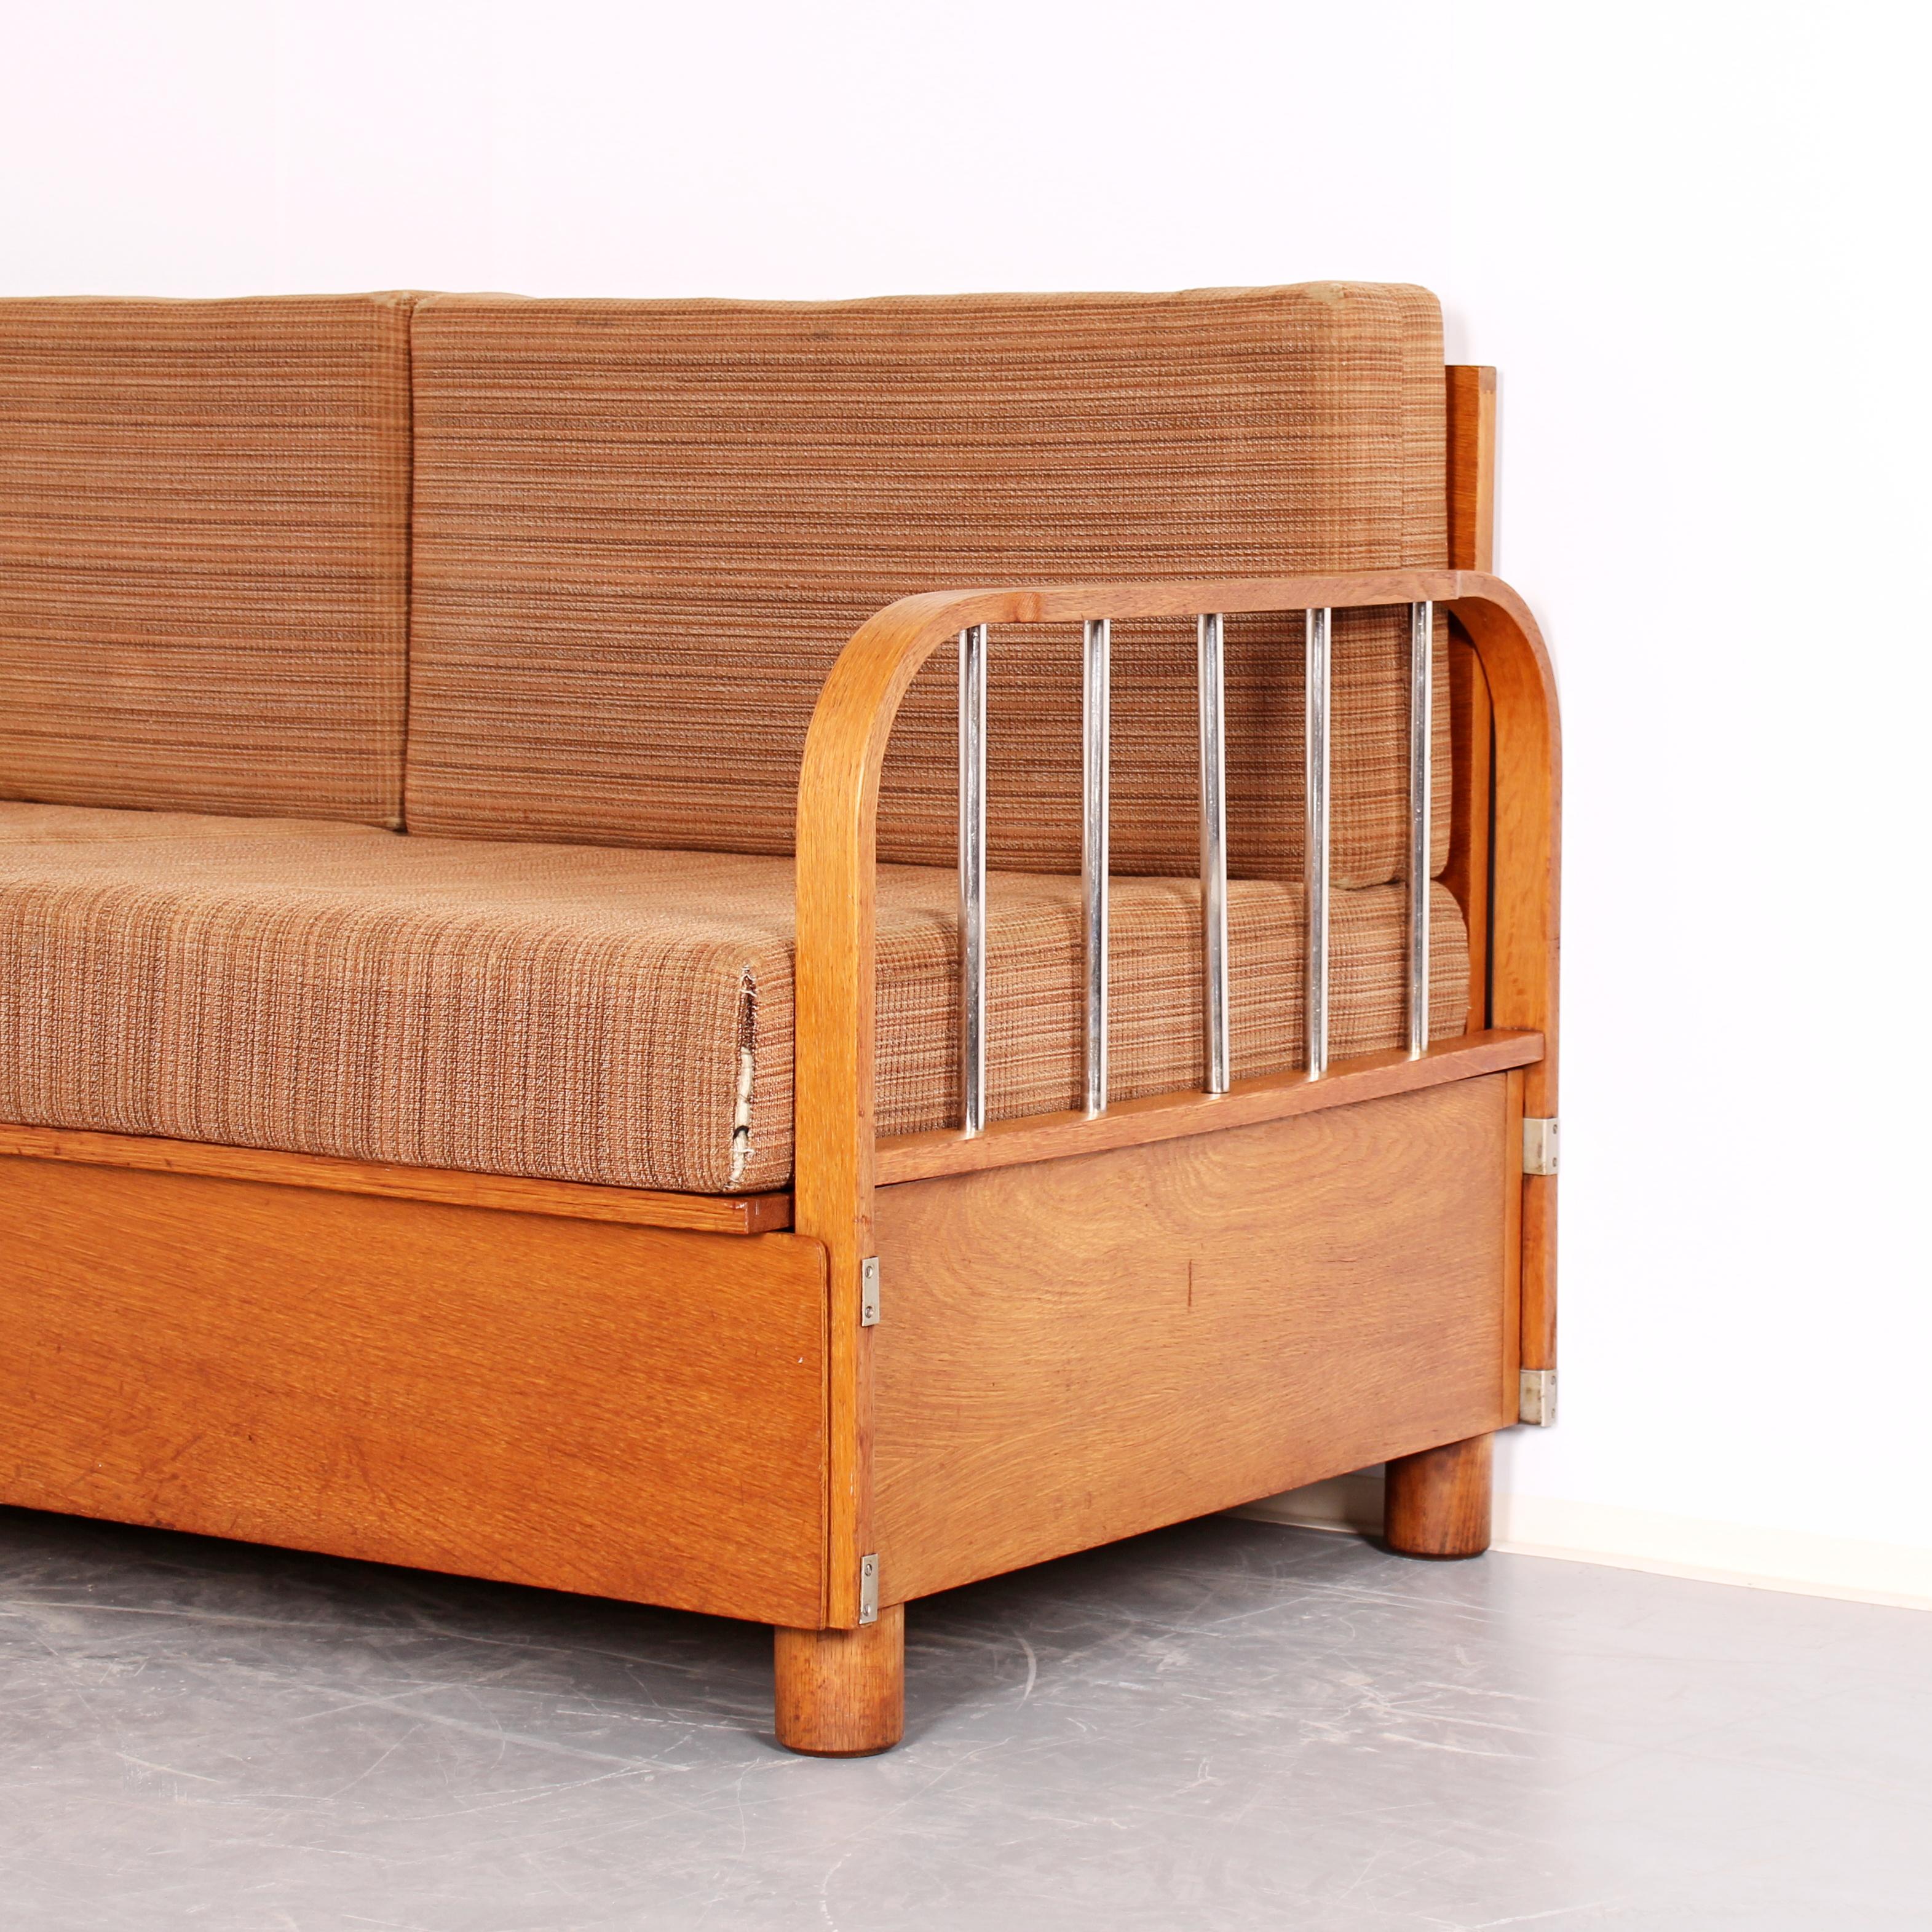 Mid-20th Century Functionalist Convertible Sofa by Jindřich Halabala, Model No. H-215, ca. 1930s For Sale